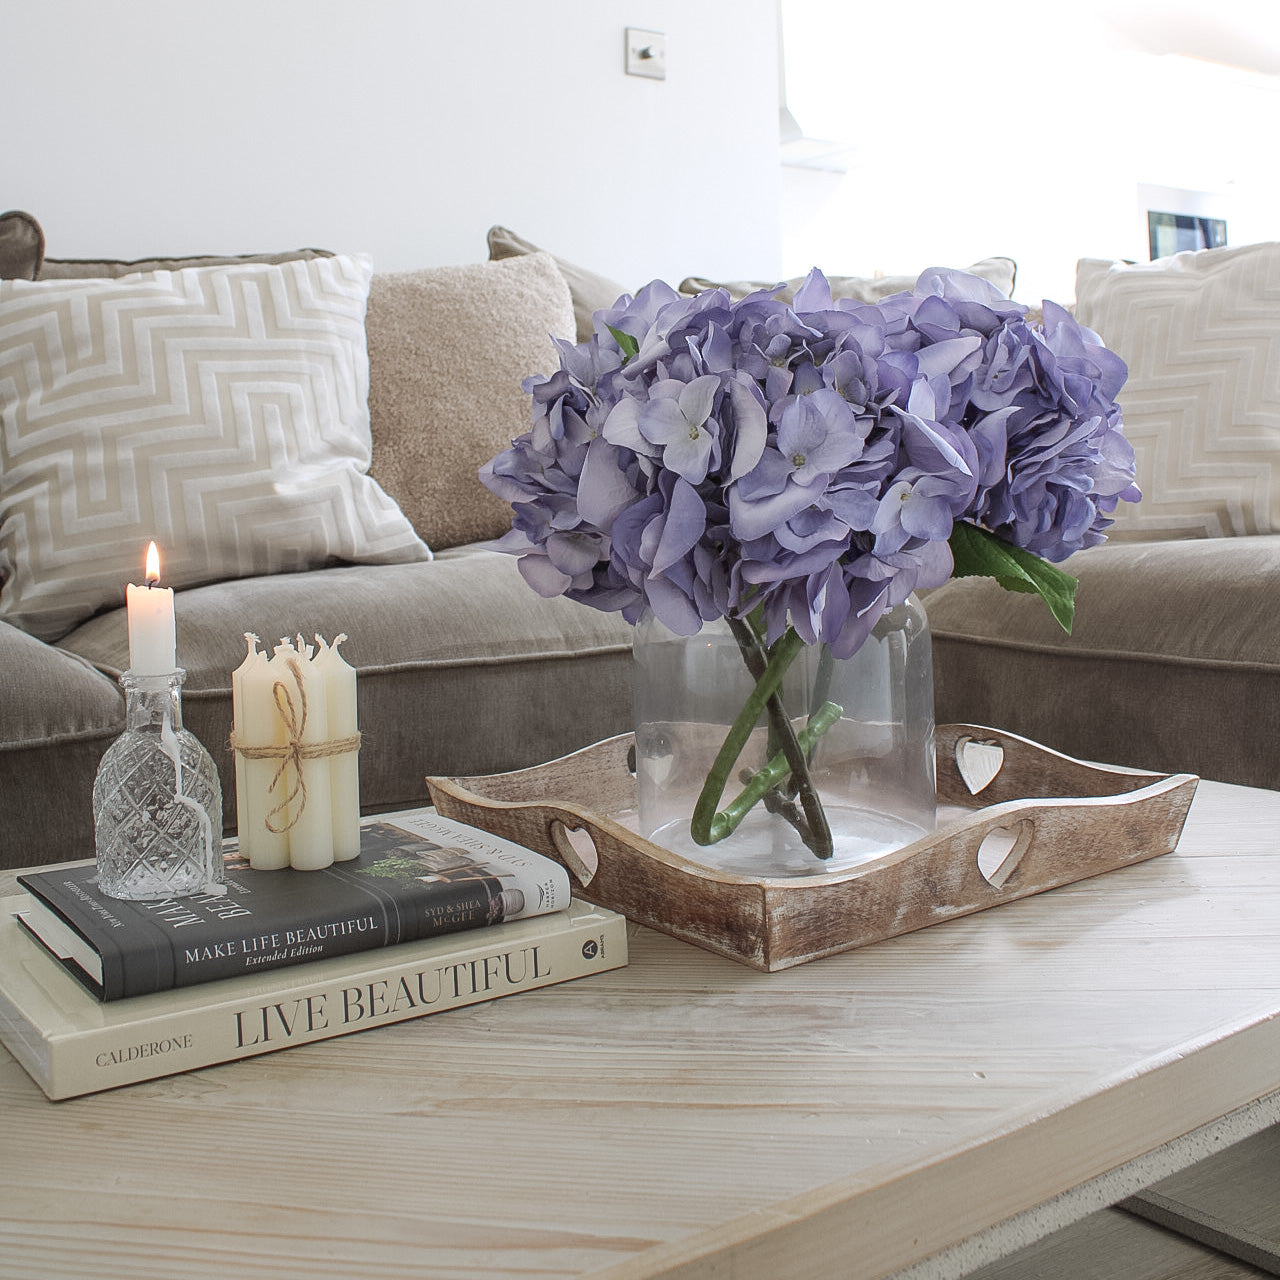 Hints and tips to style your coffee table